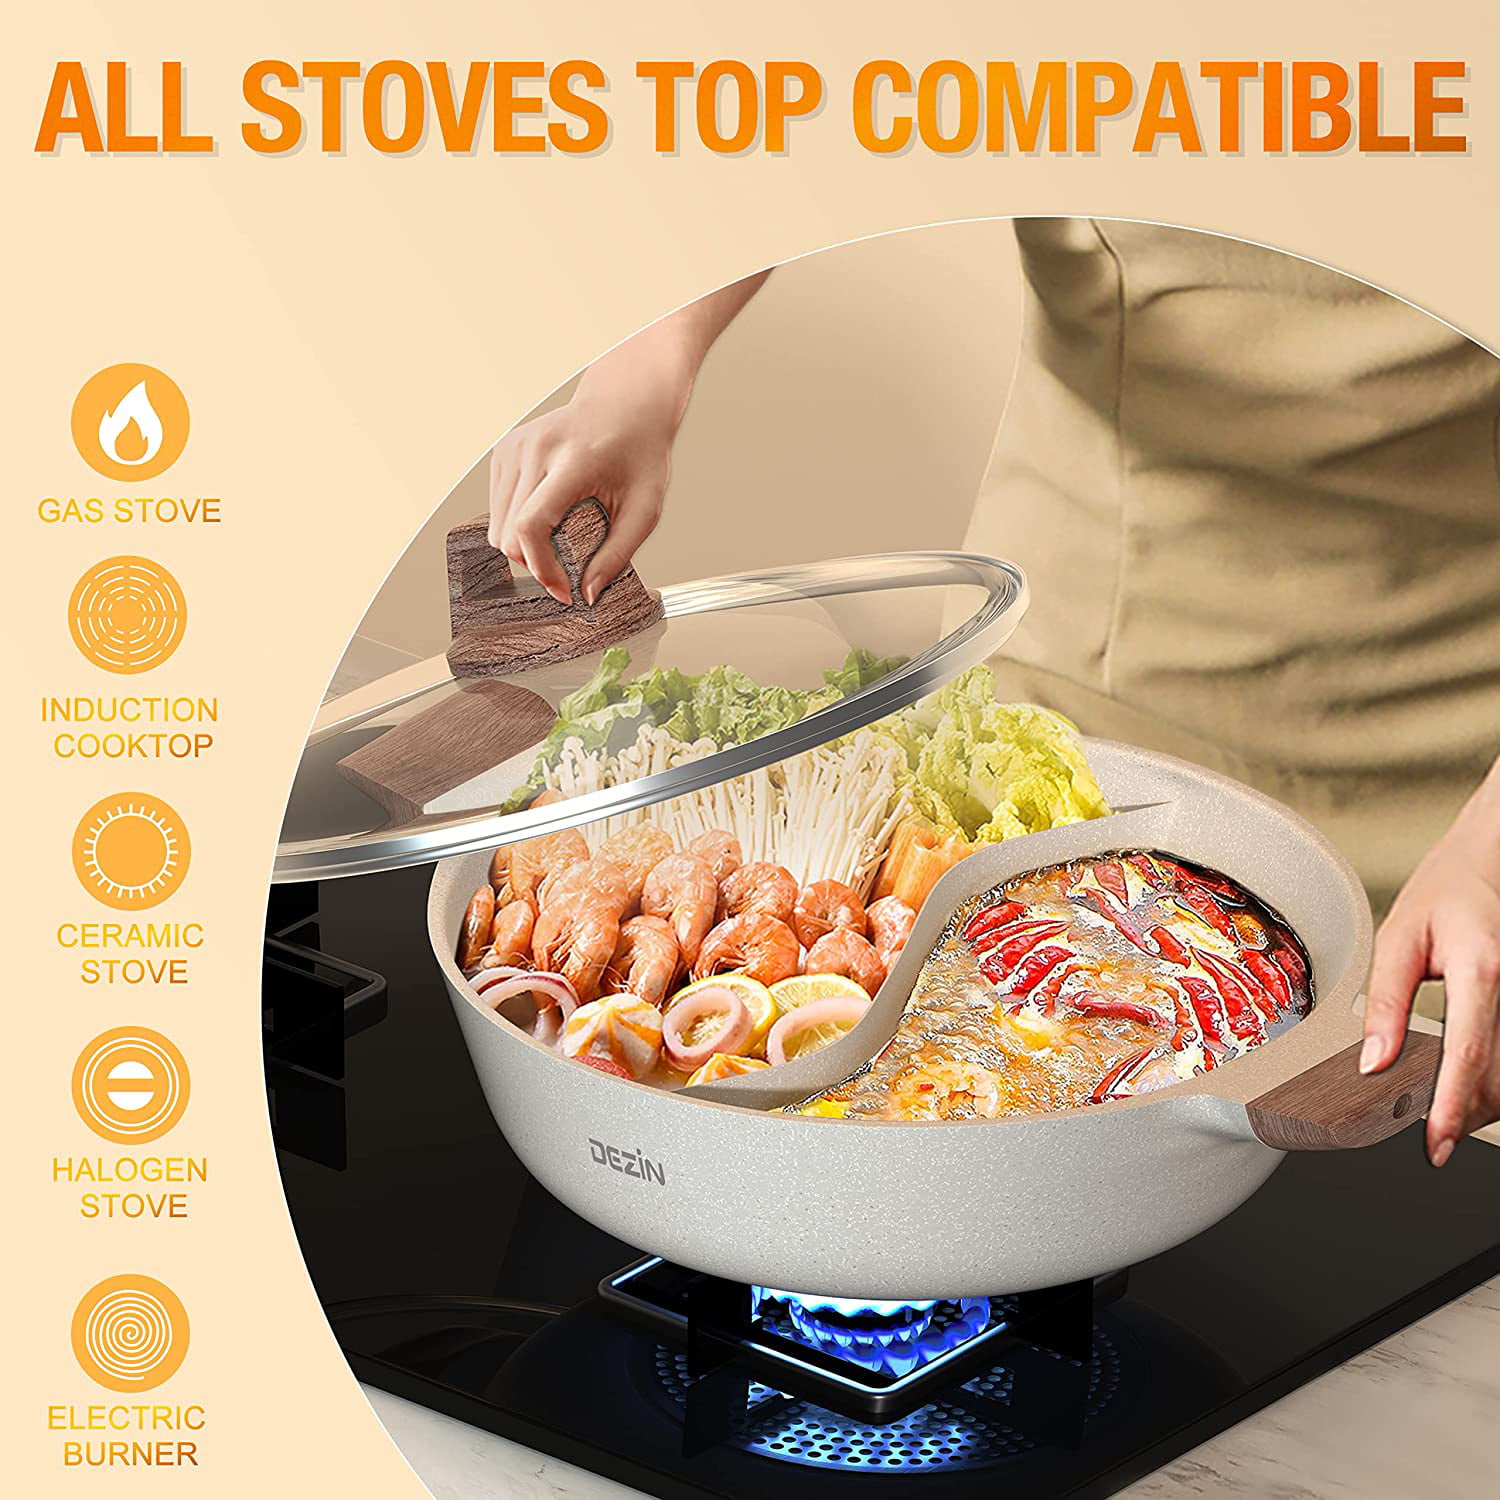 kowaku Divided Hot Pot Pan Chinese Dual Sided Pot with Divider Stainless  Steel Shabu Hot Pot for Camping Family Gathering Party Home 32 cm